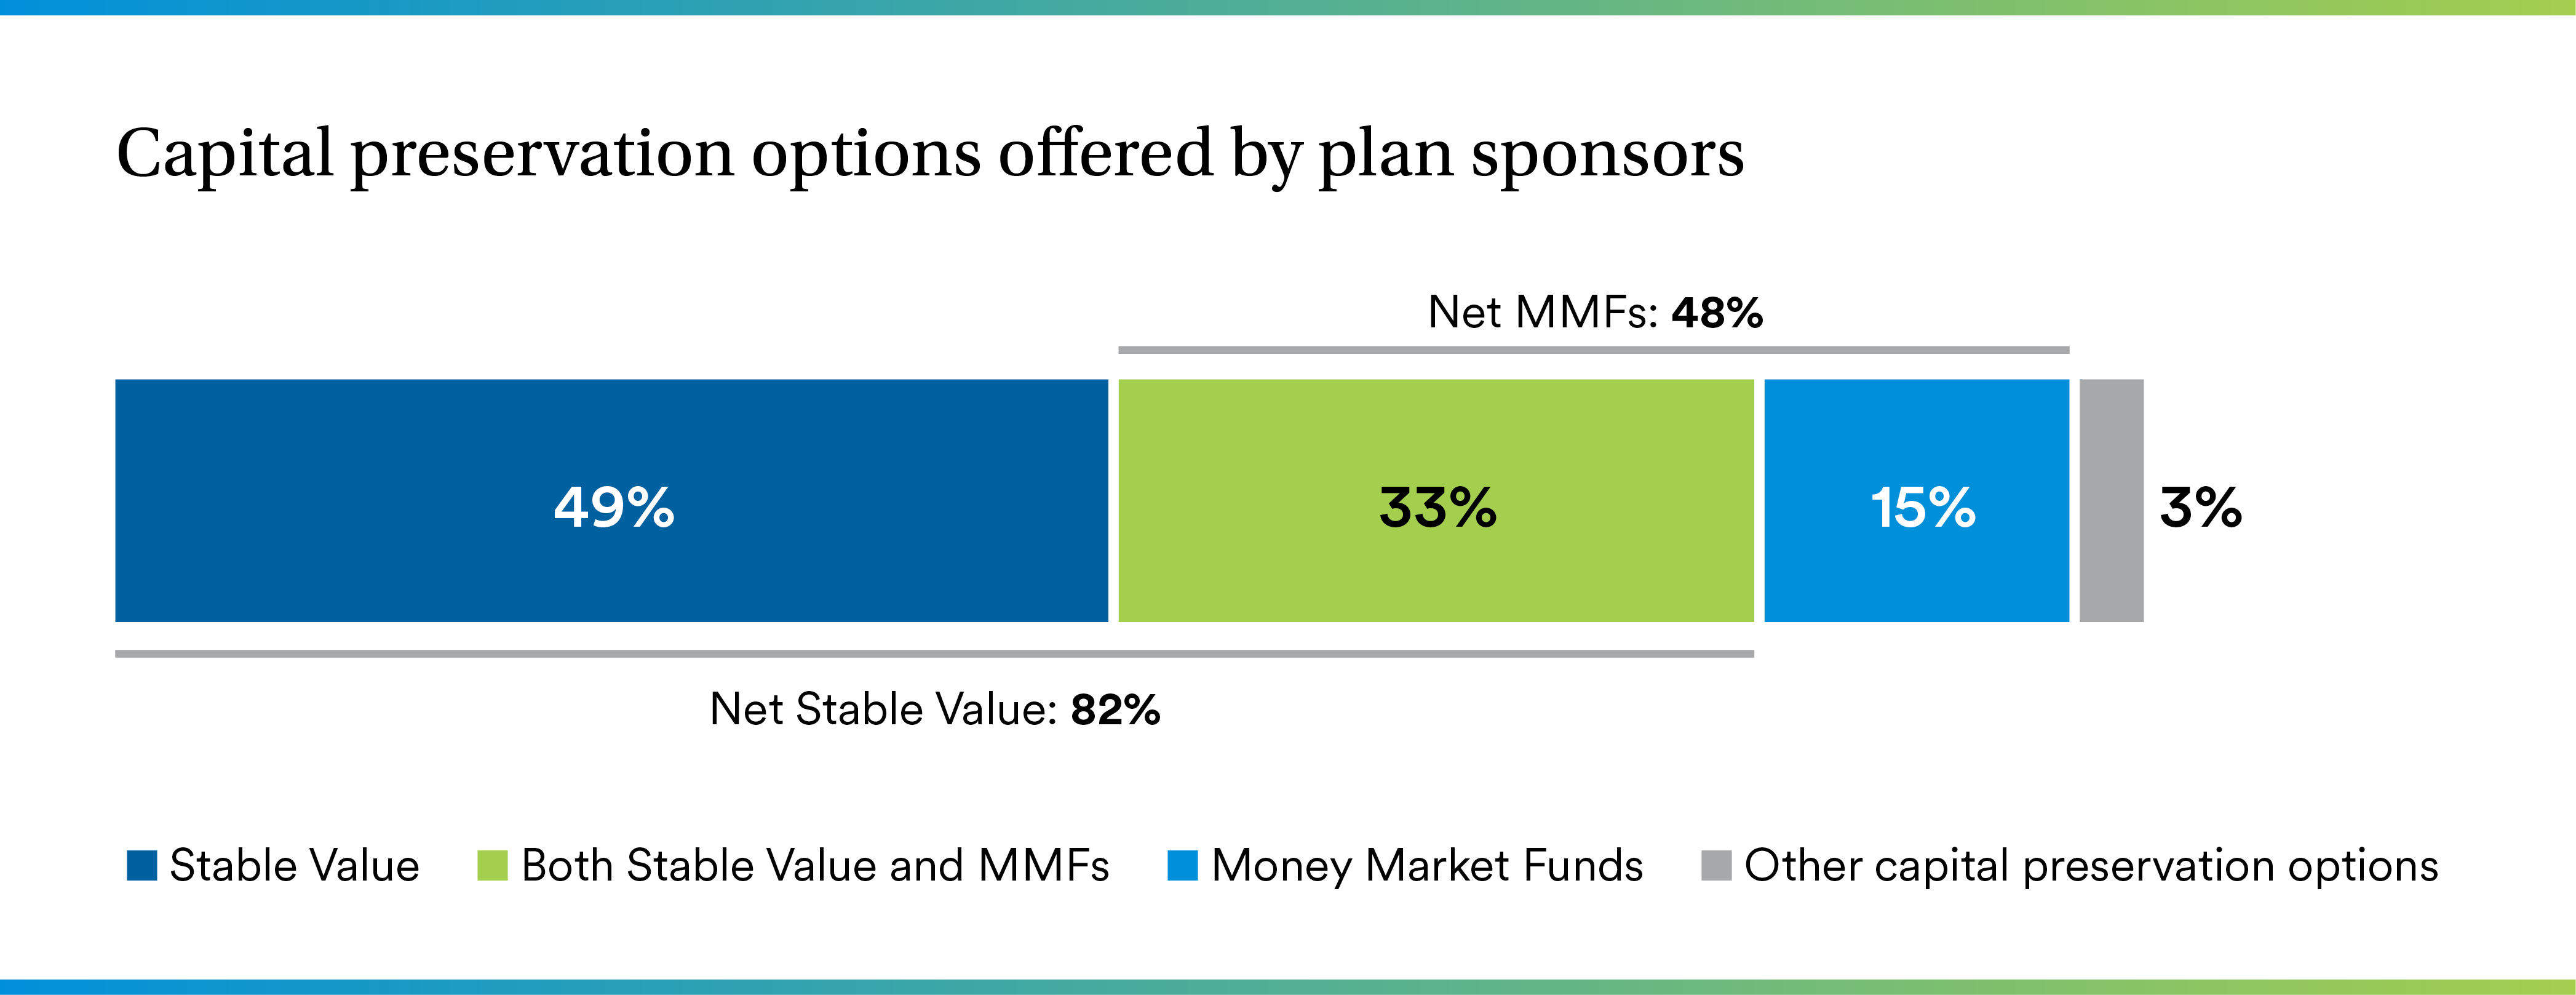 A bar chart totaling 100% shows a breakdown of the options offered as follows: 49% Stable Value, 33% both Stable Value and MMf's, 15% money market funds, and 3% other capital preservation options. Net MMF's are 48%.